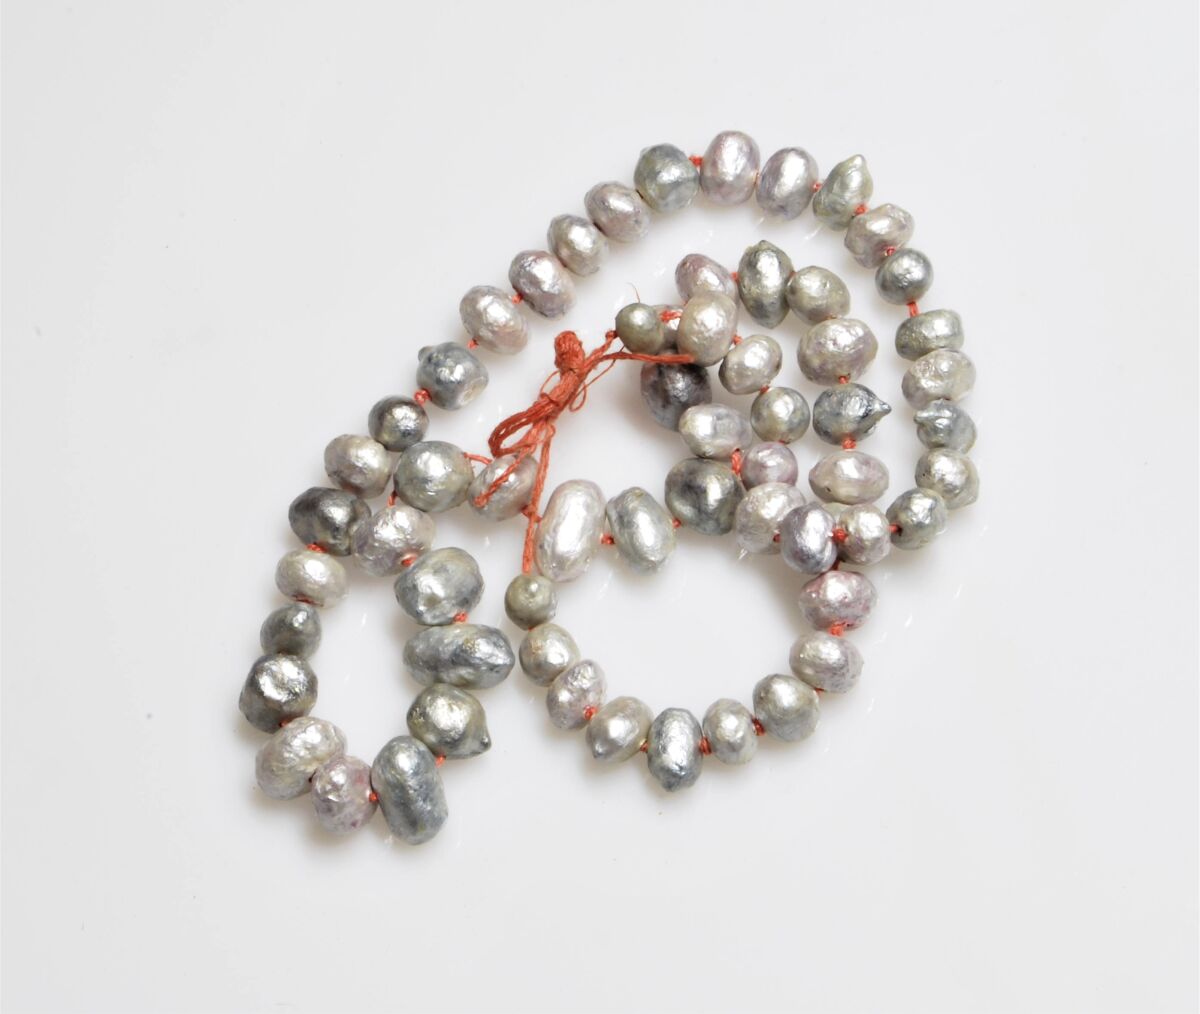 Lena Echelle's "Real Pearl Necklace."